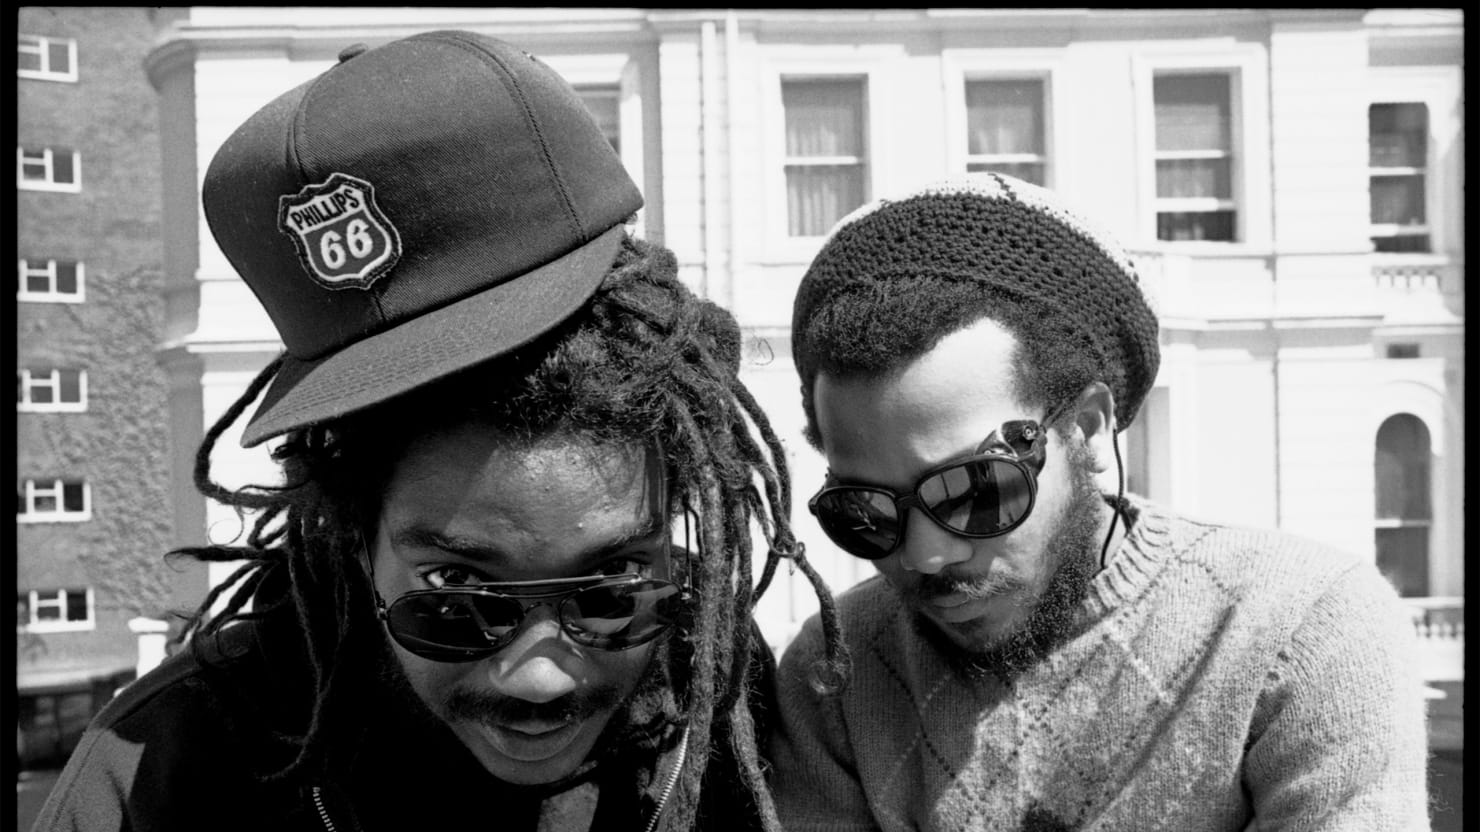 How Bad Brains Are Staying Positive and Moving Forward